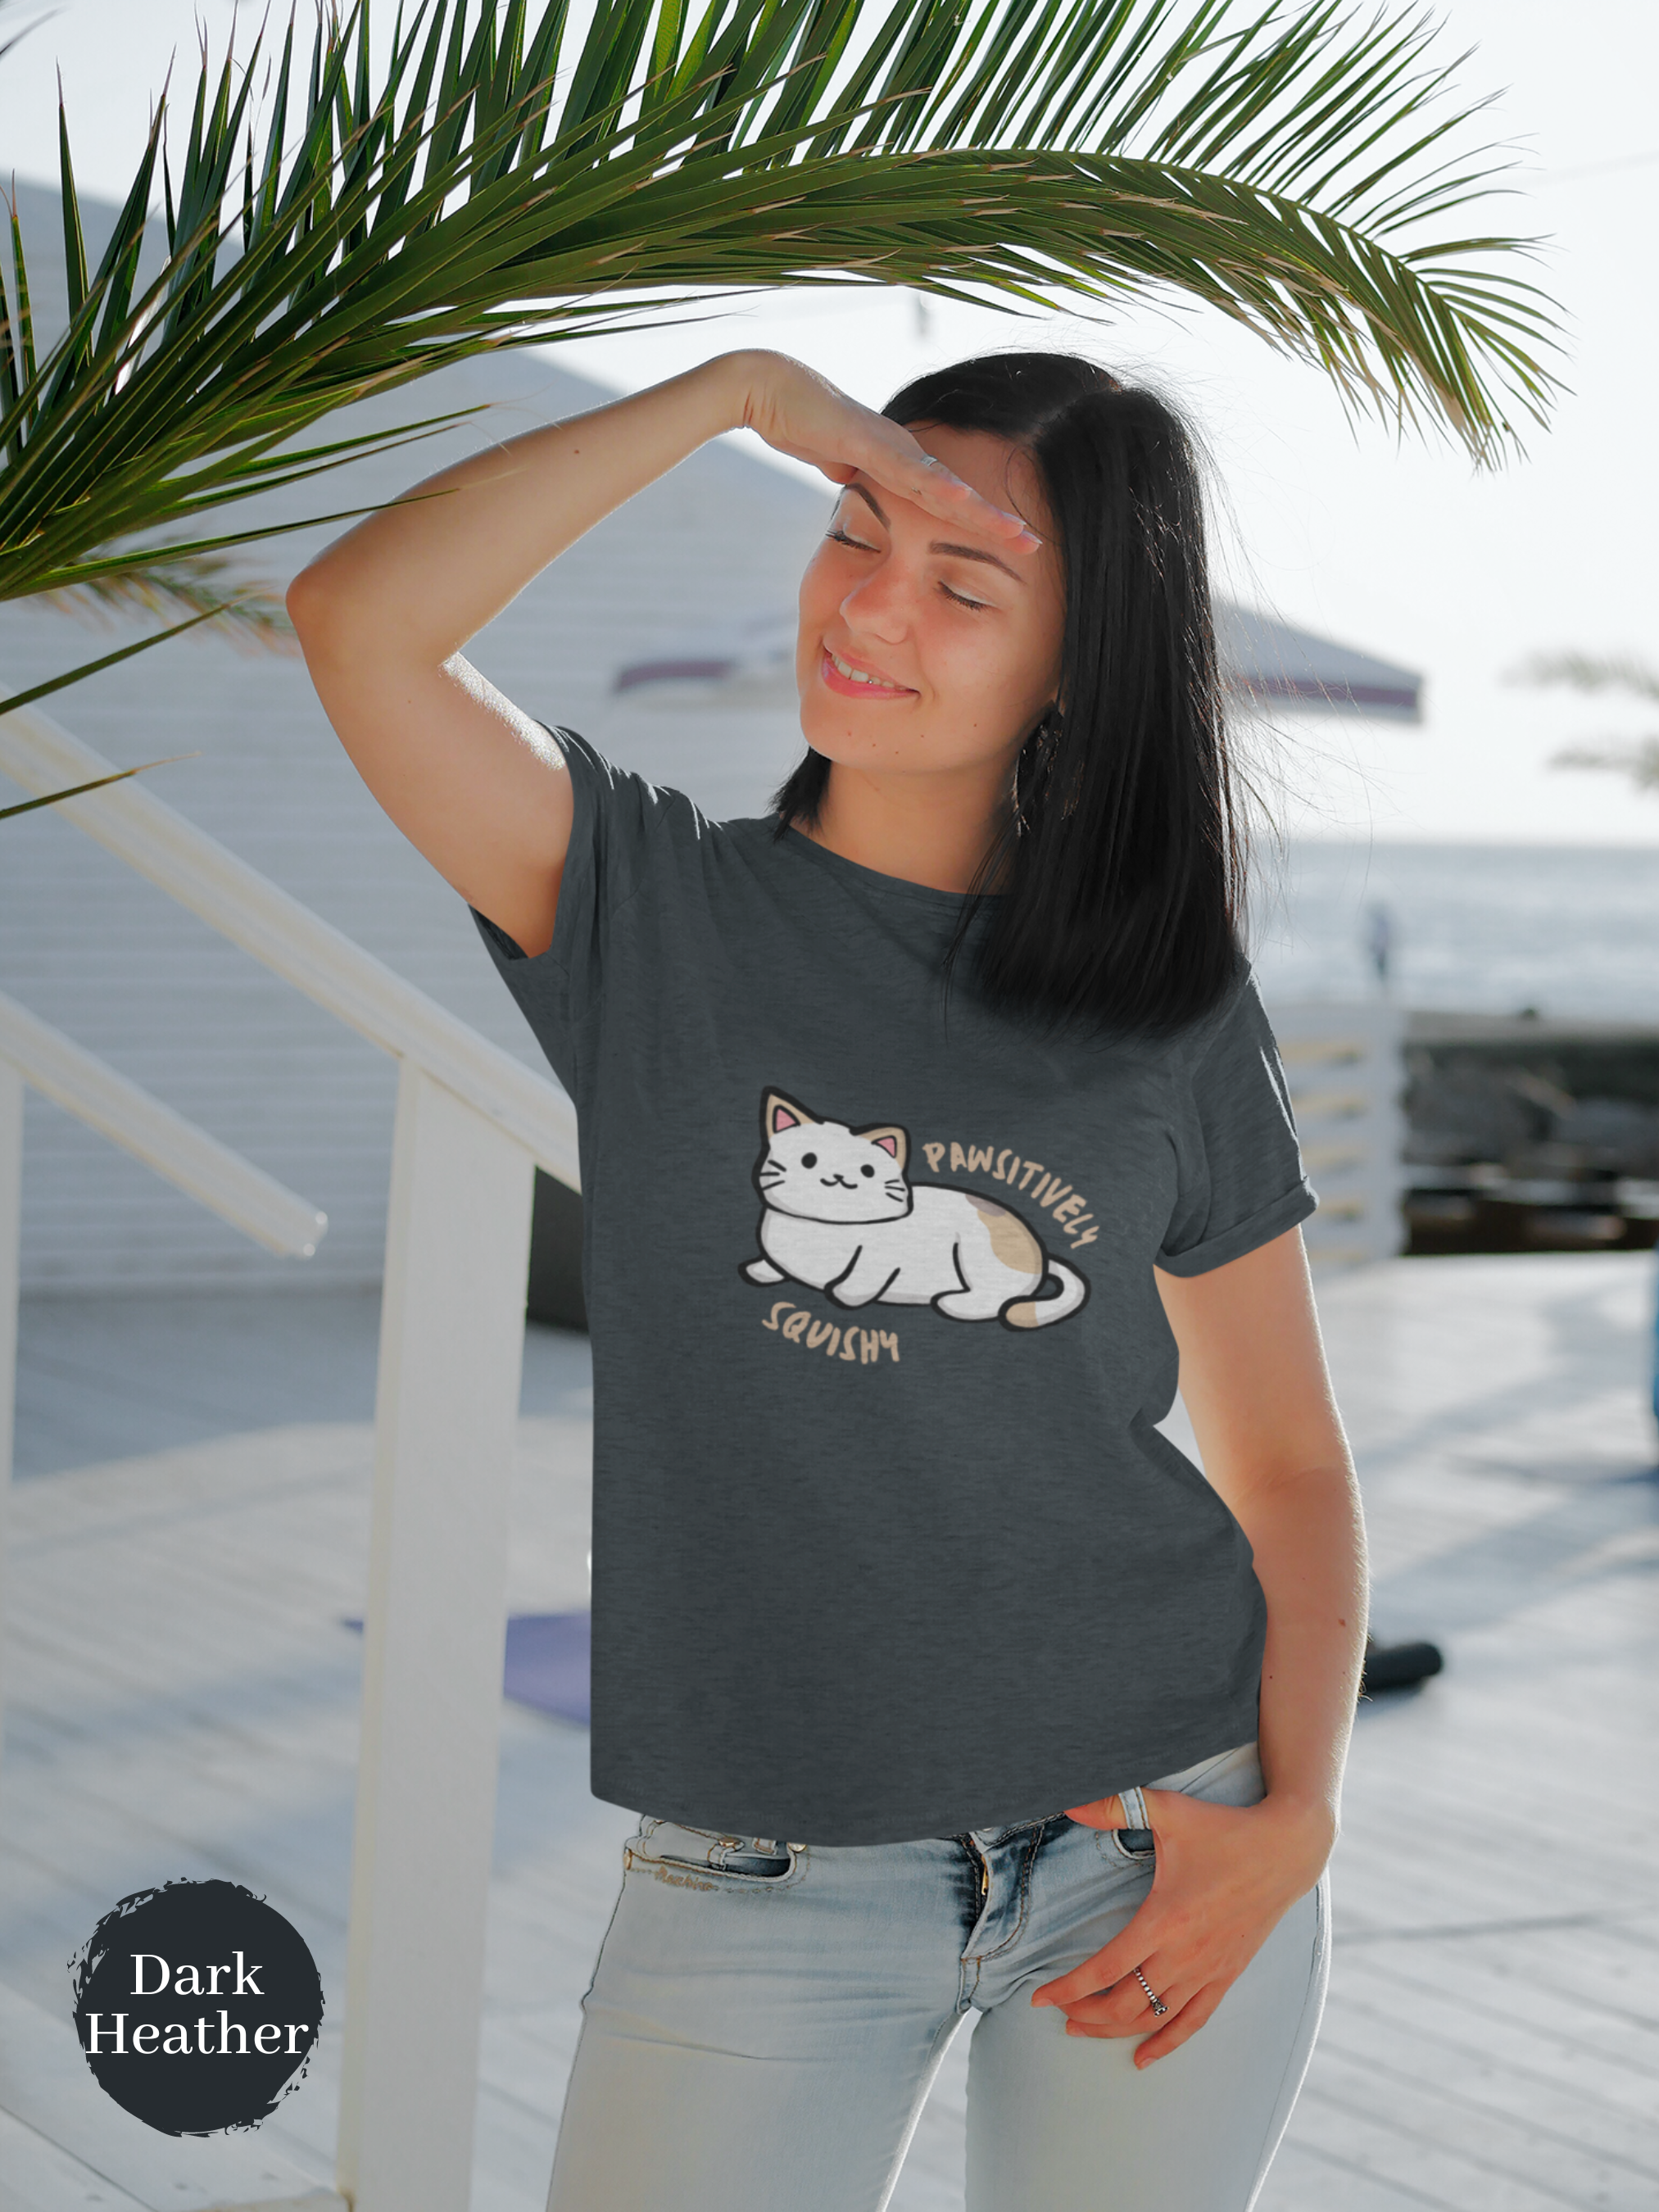 Cat T-shirt: Pawsitively Squishy - Chubby Cat Art on a Japanese-Inspired Shirt - Perfect for Cat Lovers and Feline Fashion Enthusiasts